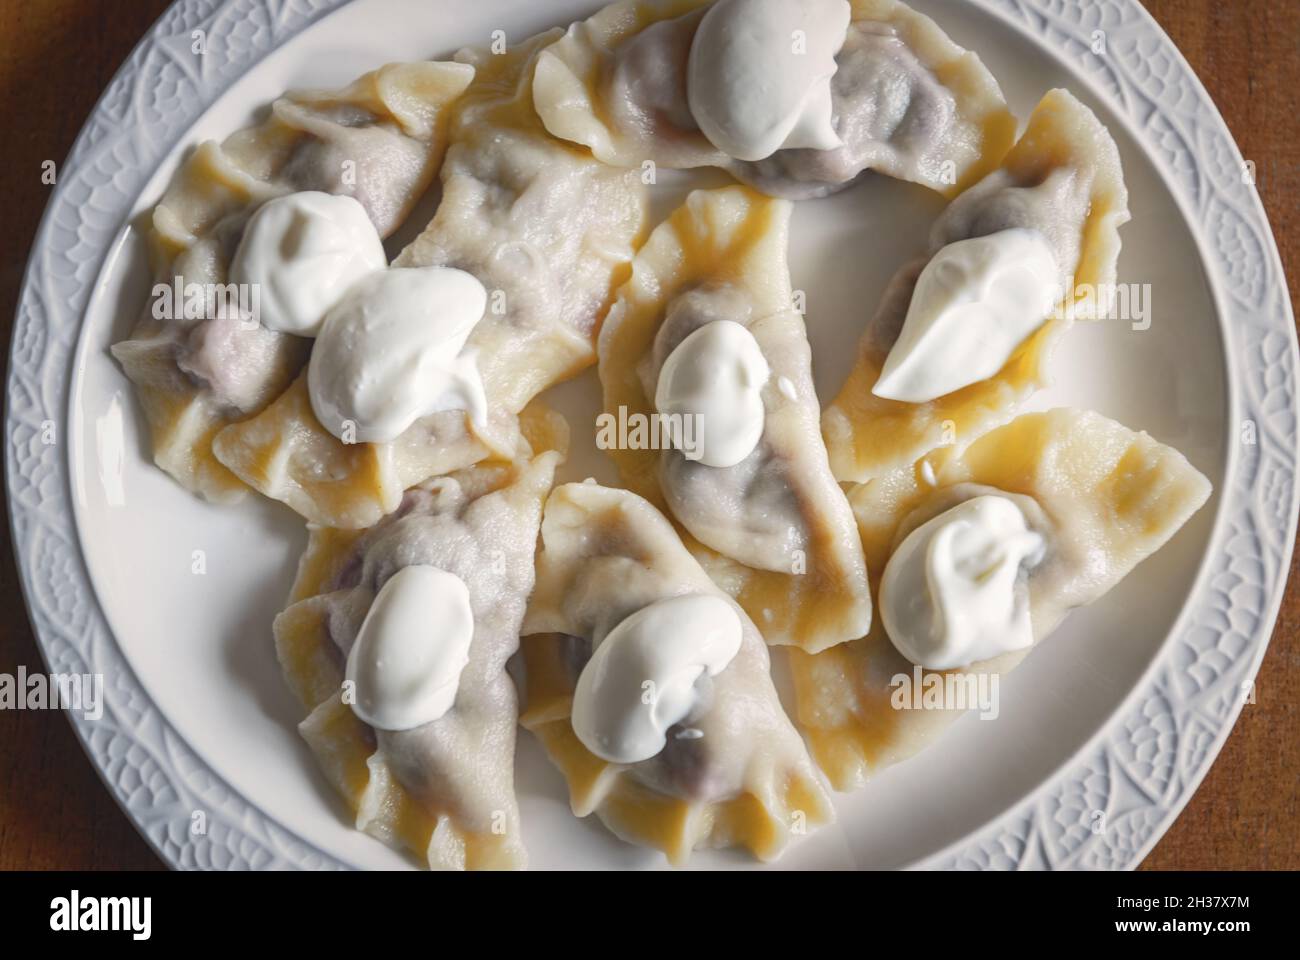 Fresh dumplings with cherry filling and cream on a plate Stock Photo